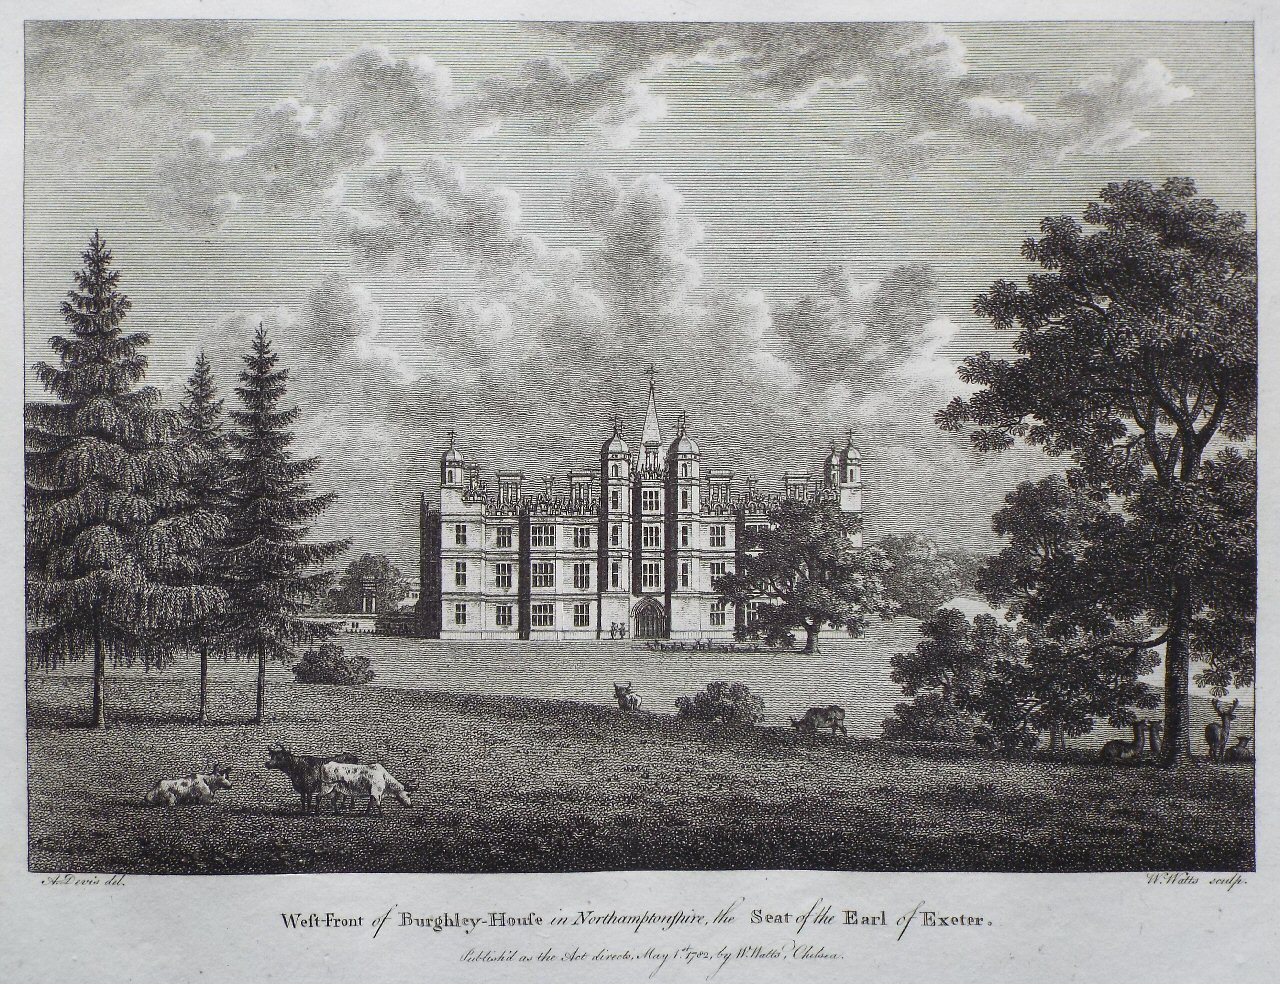 Print - West-Front of Burghley-House in Northamptonshire, the Seat of the Earl of Exeter. - Watts